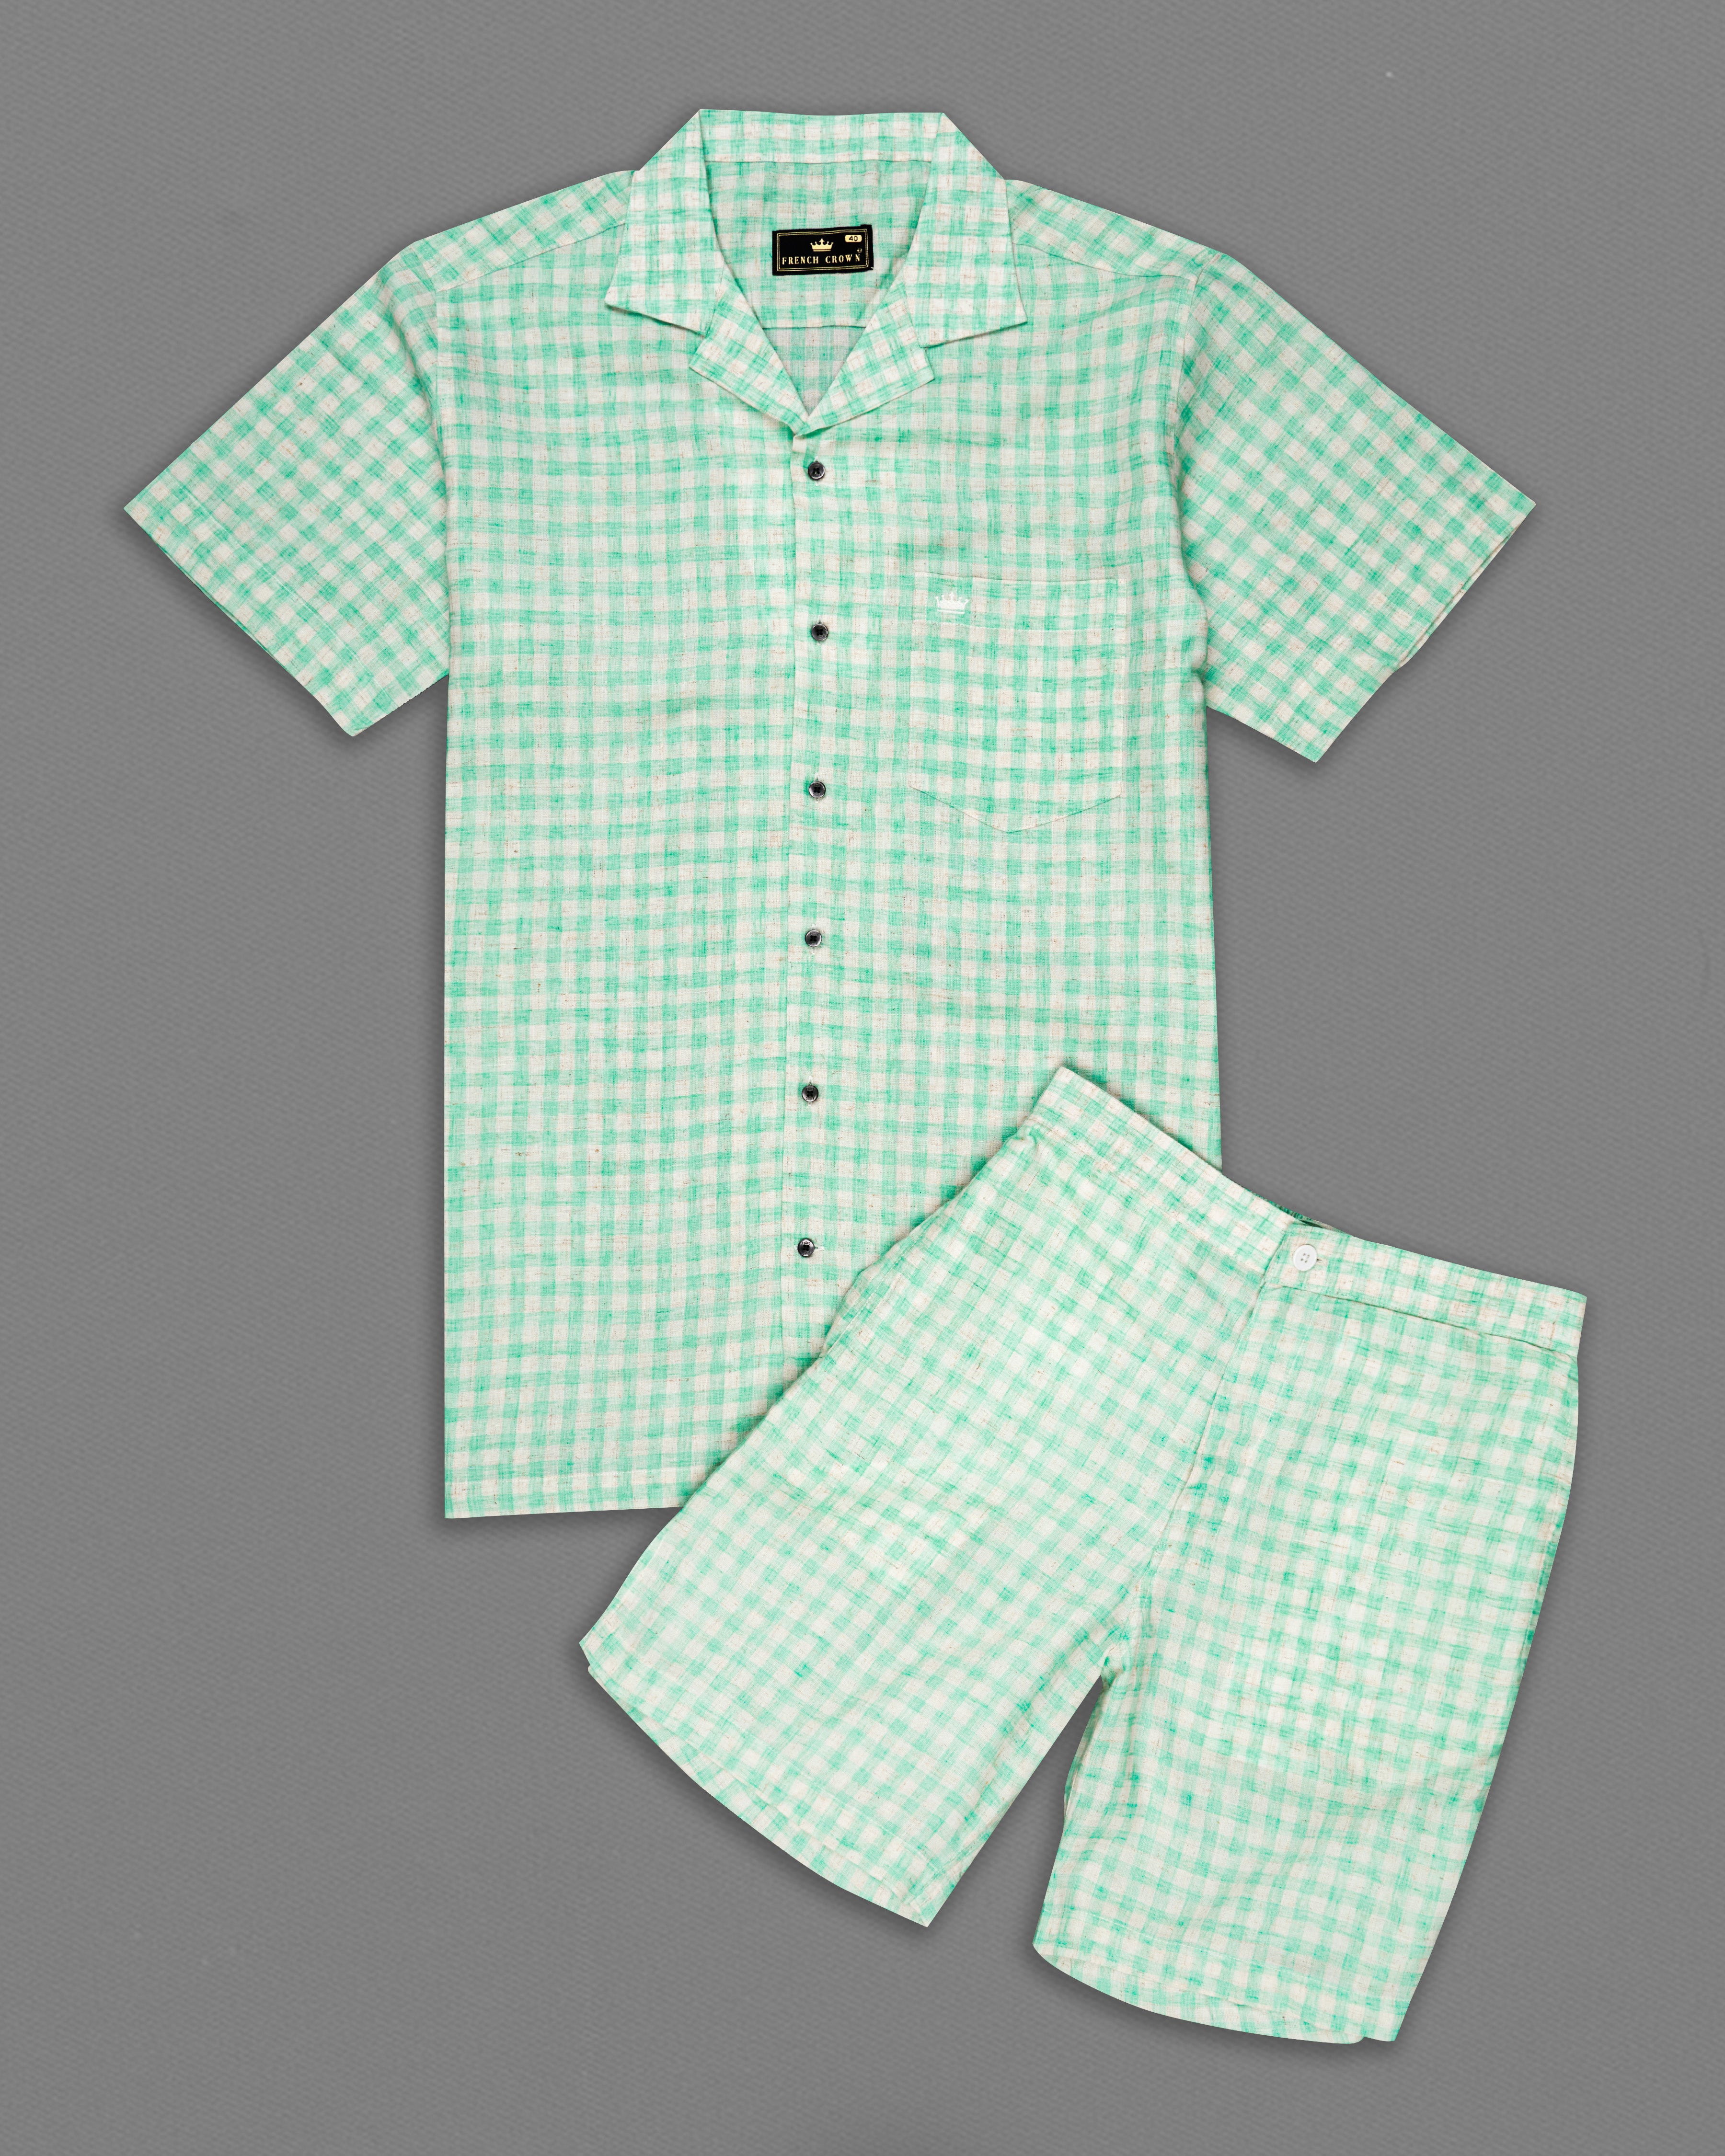 Turquoise Green and Mercury Gray Checkered Co-ords Sets 9699-CC-BLK-SS-SR210-P584-38, 9699-CC-BLK-SS-SR210-P584-39, 9699-CC-BLK-SS-SR210-P584-40, 9699-CC-BLK-SS-SR210-P584-42, 9699-CC-BLK-SS-SR210-P584-44, 9699-CC-BLK-SS-SR210-P584-46, 9699-CC-BLK-SS-SR210-P584-48, 9699-CC-BLK-SS-SR210-P584-50, 9699-CC-BLK-SS-SR210-P584-52